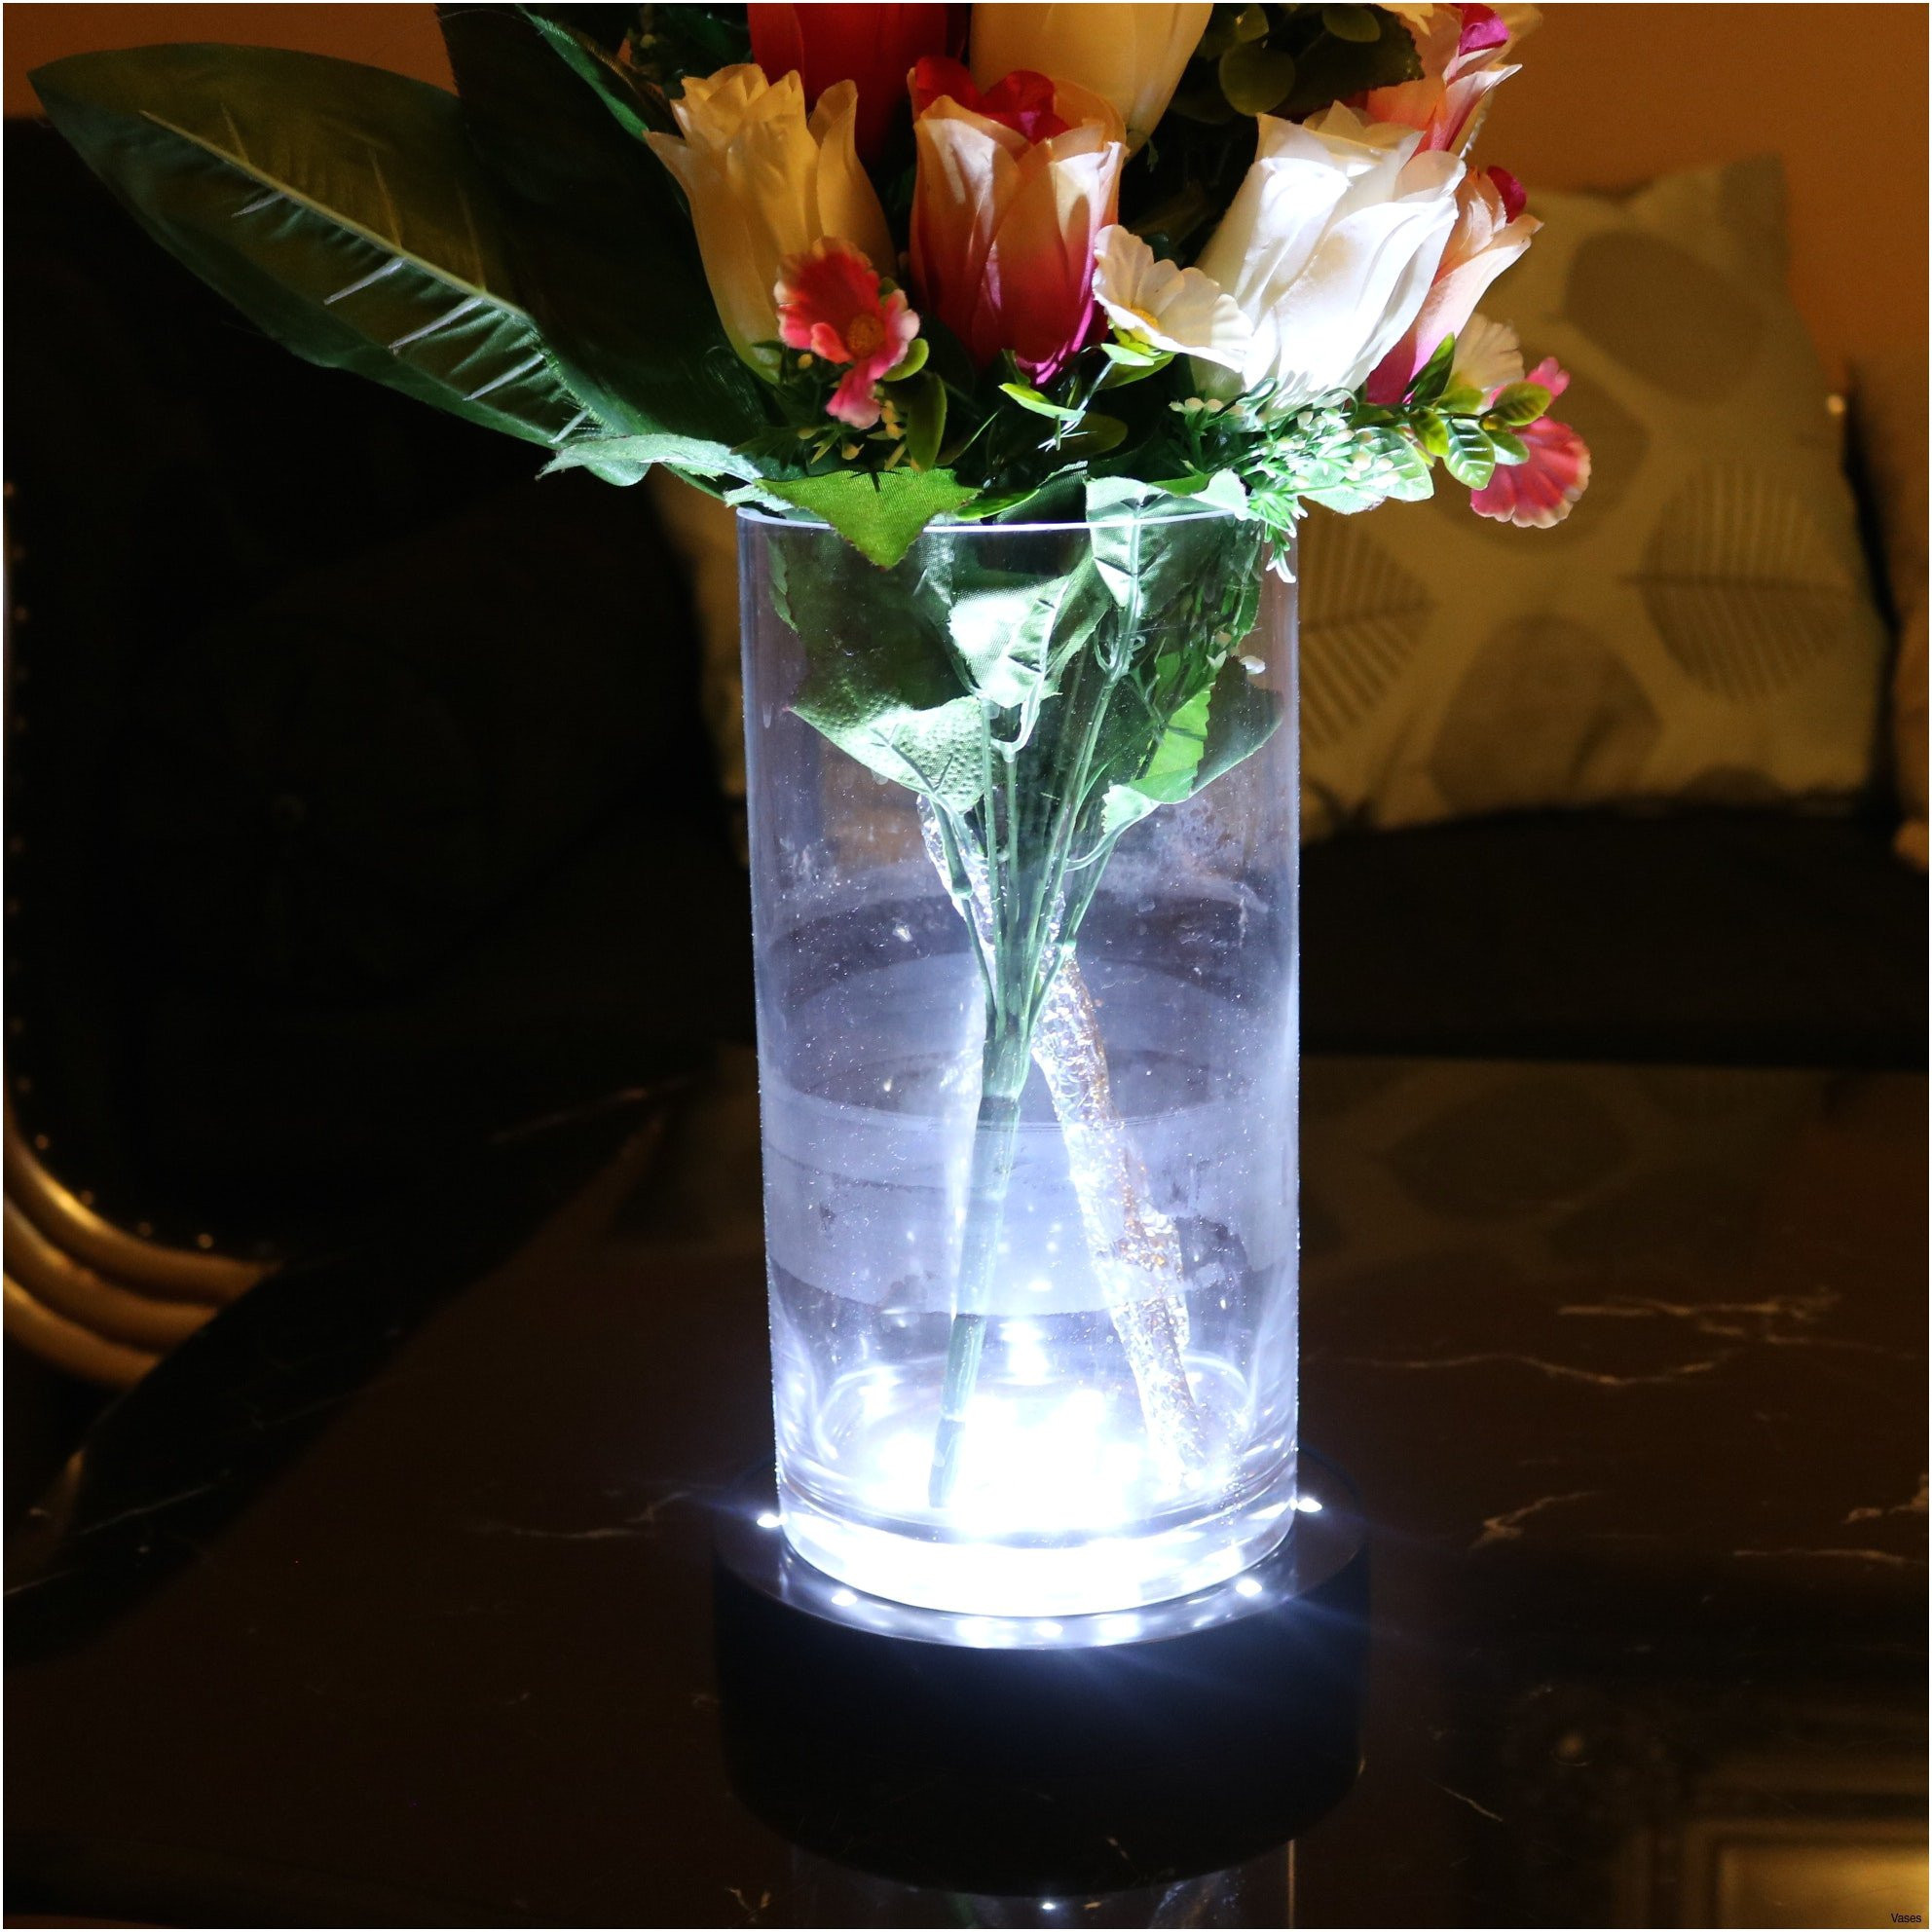 new beetle flower vase of stock of single flower vase vases artificial plants collection with single flower vase pics wedding flowers excellent vases disposable plastic single cheap of stock of single